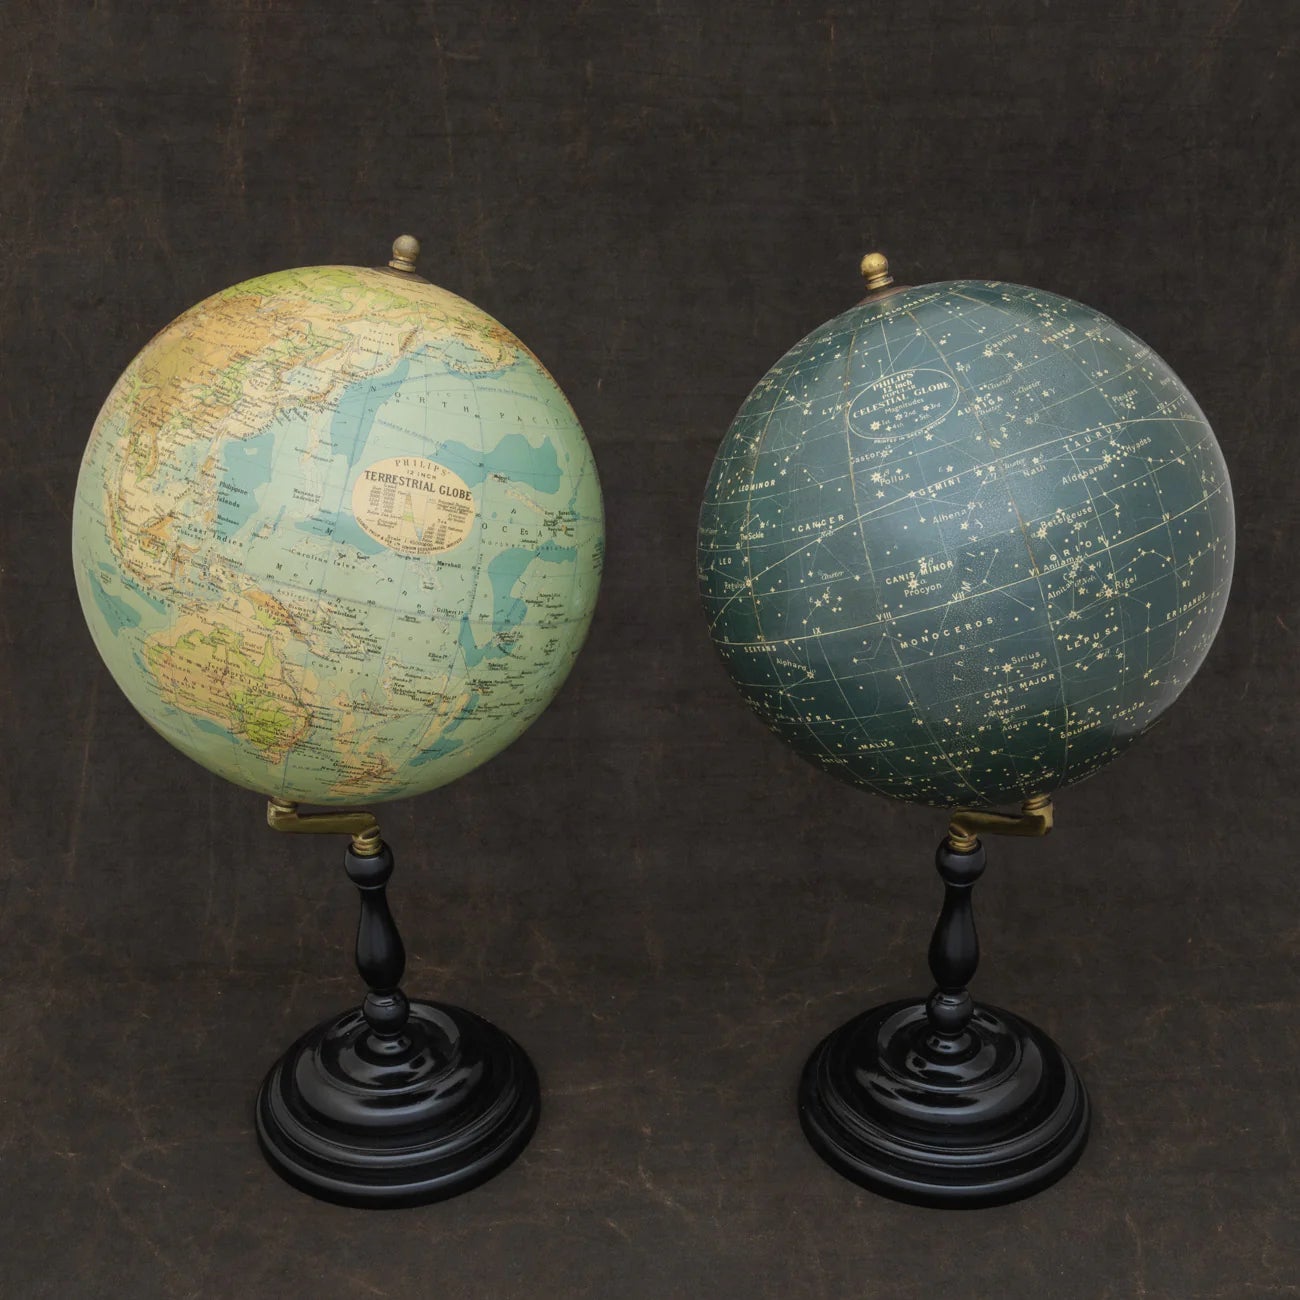 A wonderful set of Terrestrial and Celestial 12 inch globes by George Philip and Son. Presented on brass inclined plain mounts attached to original turned ebonized wooden bases and uprights with axes secured at the top by brass acorn finials.